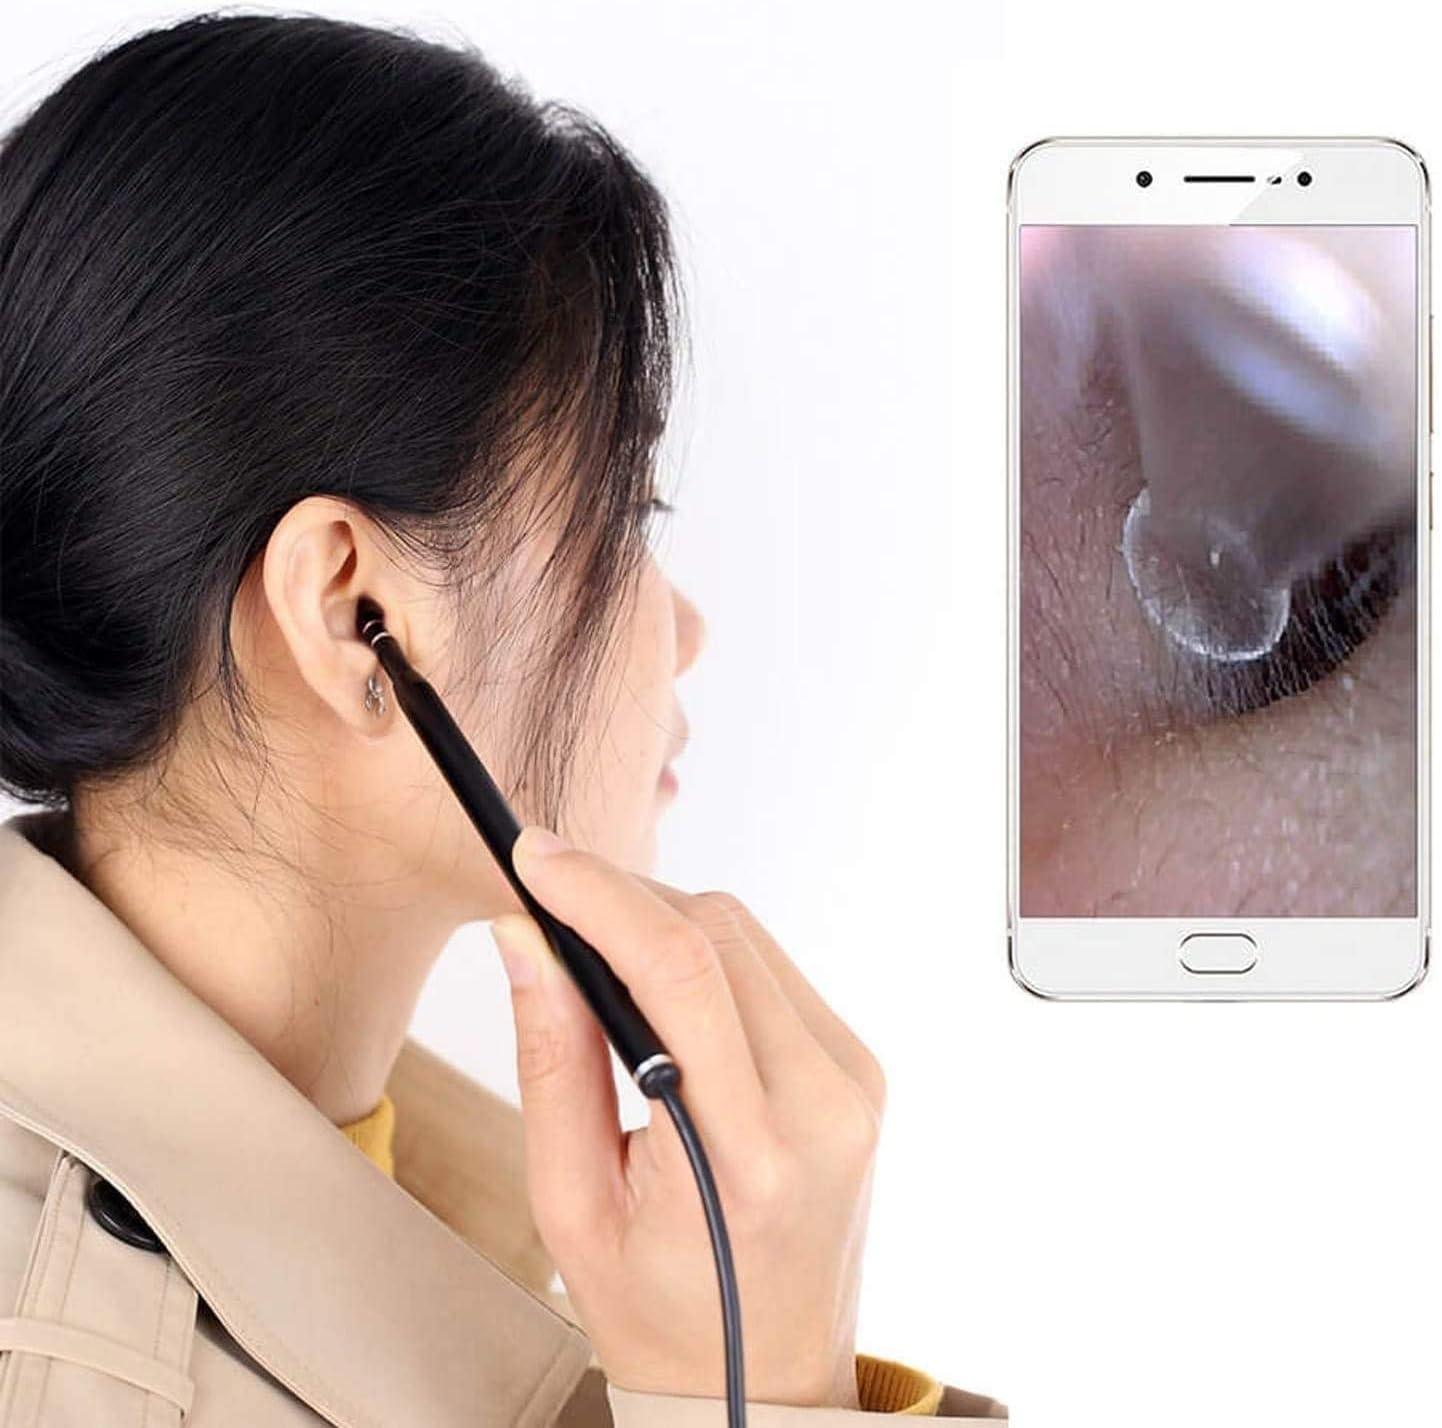 RMENST Ear Wax Removal Earwax Removal Camera with LED Lights HD